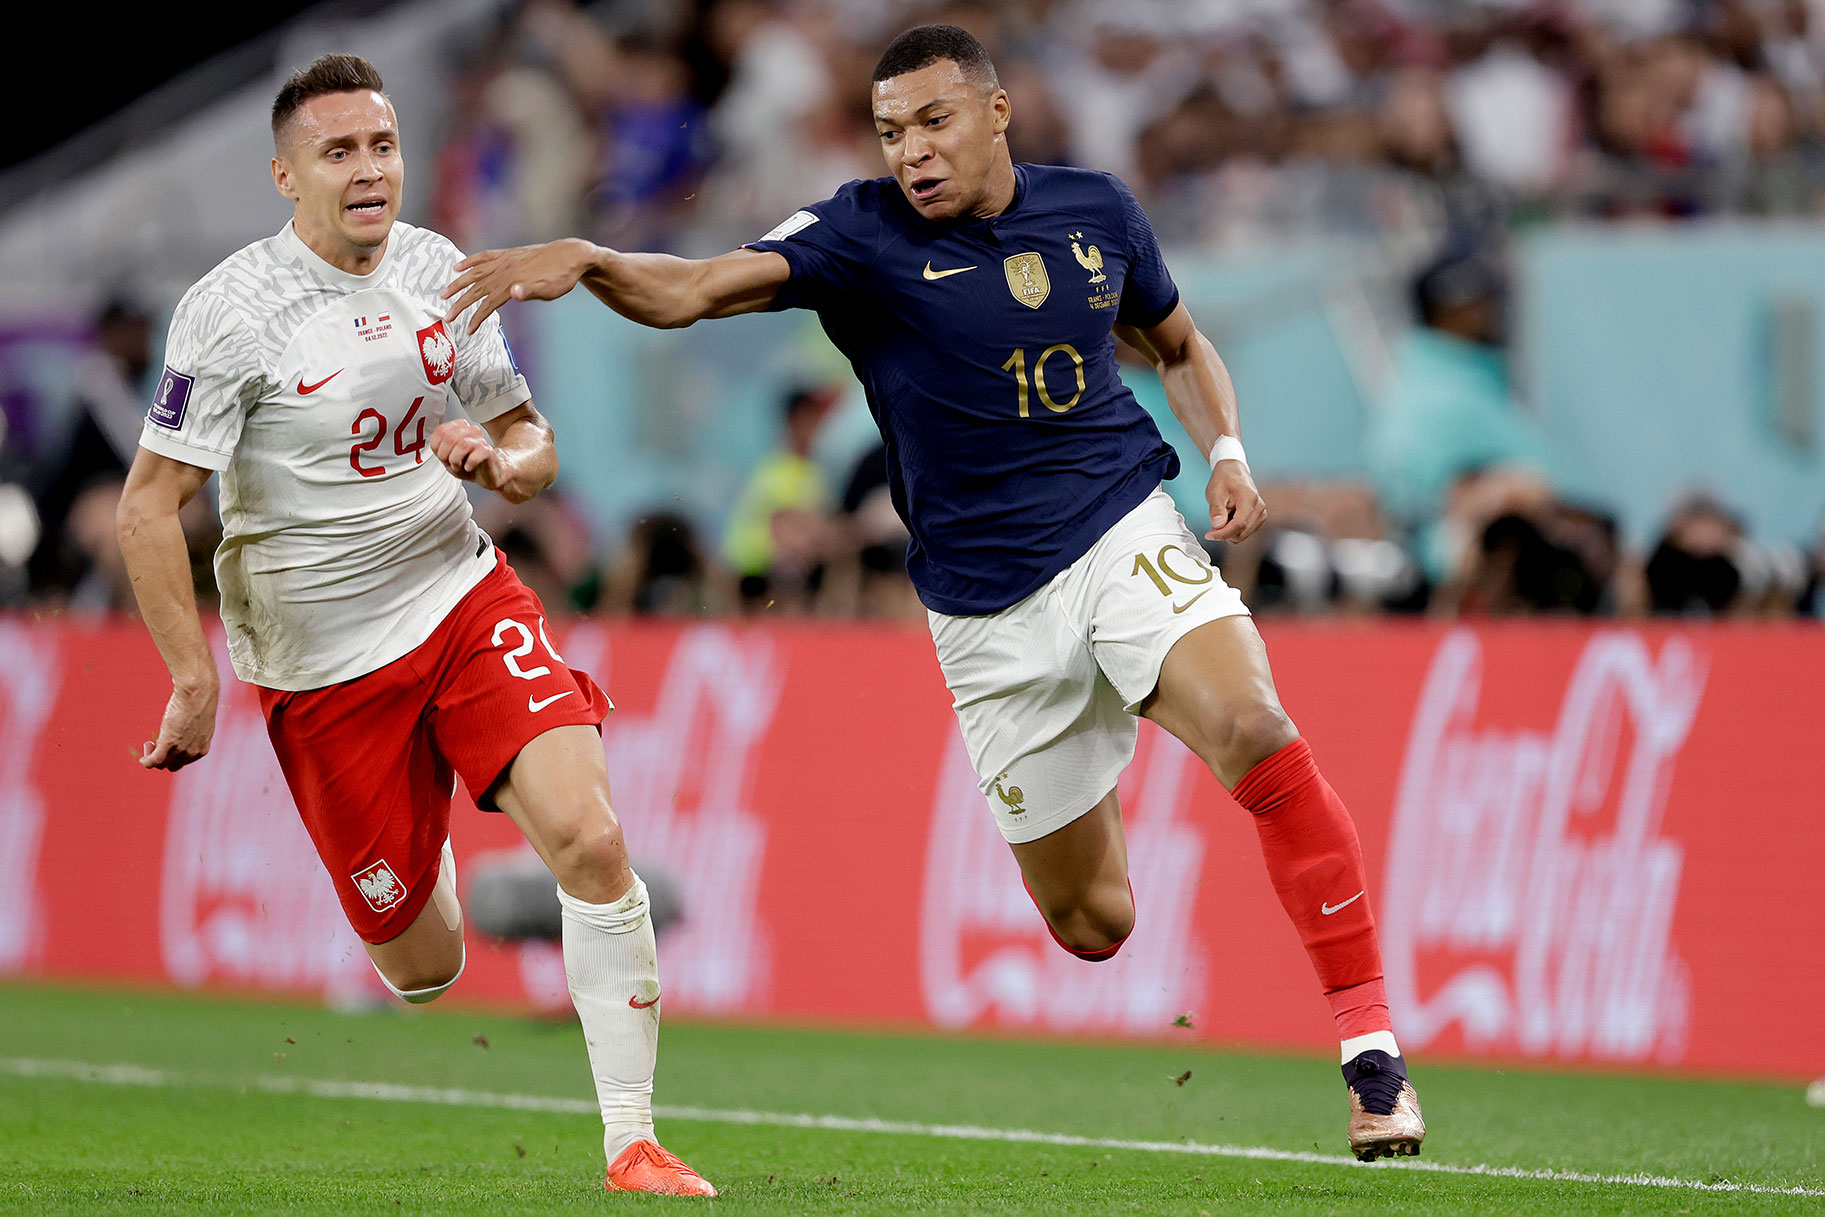 L-R) Przemyslaw Frankowski of Poland, Kylian Mbappe of France during the World Cup match between France v Poland